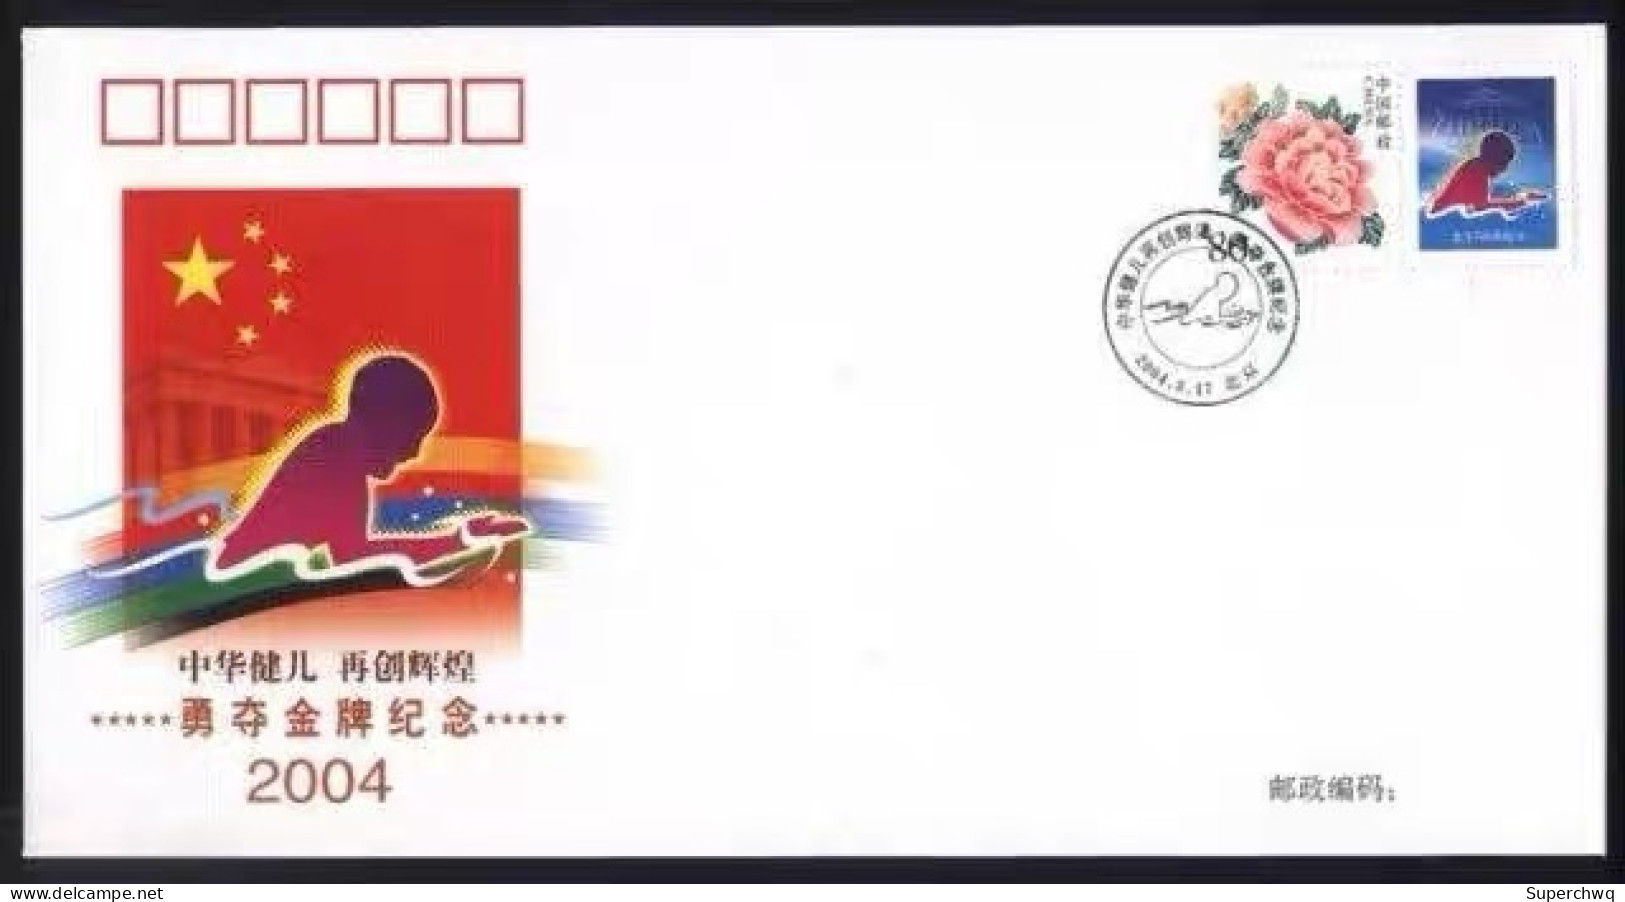 China cover,The Chinese delegation won the gold medal at the 2004 Athens Olympics，32 covers